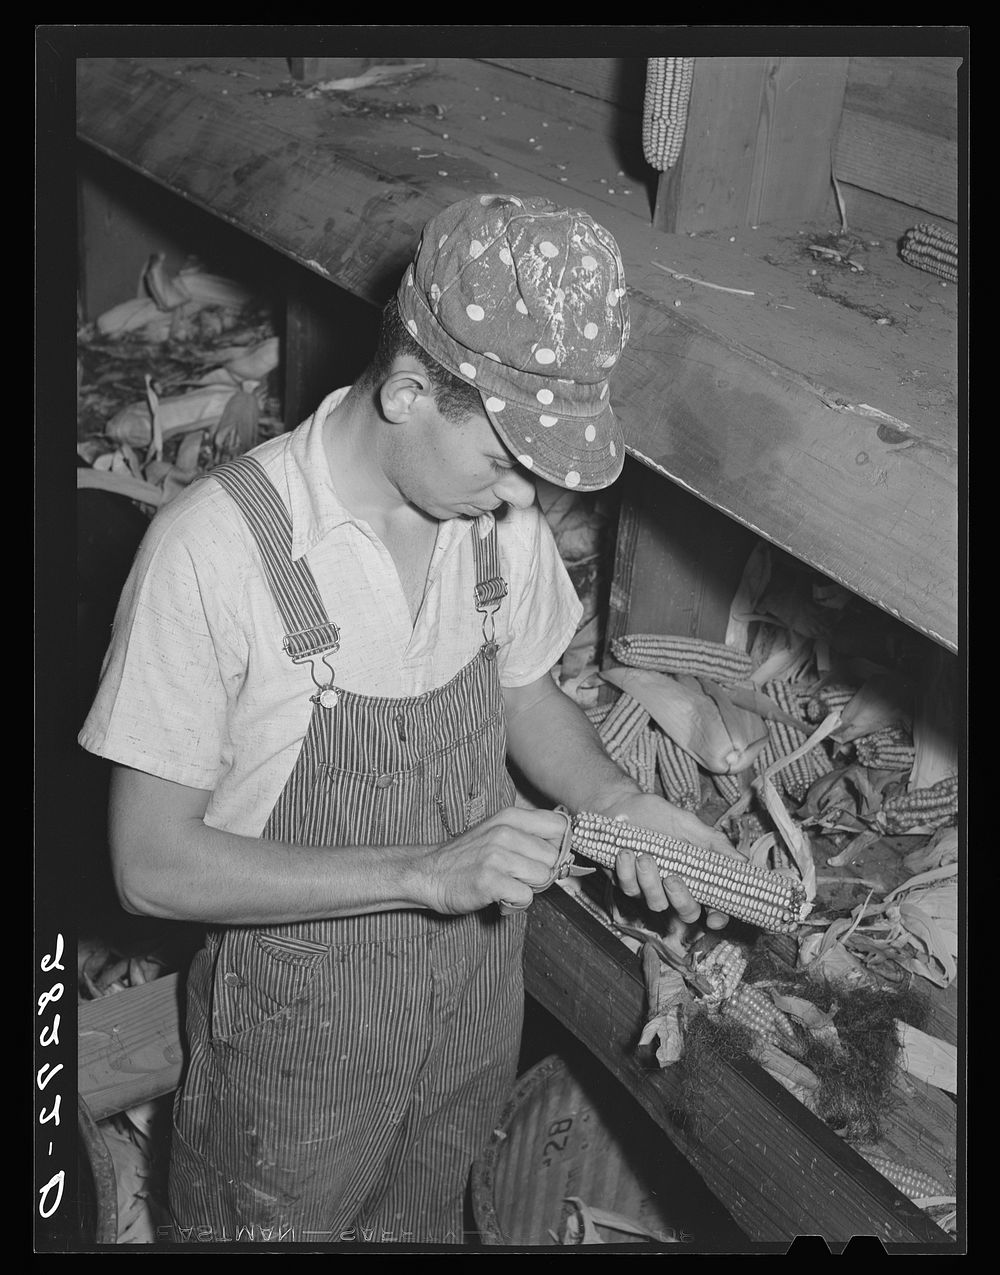 Removing damaged kernels from ears of hybrid seed corn. Reinbeck, Iowa. Sourced from the Library of Congress.